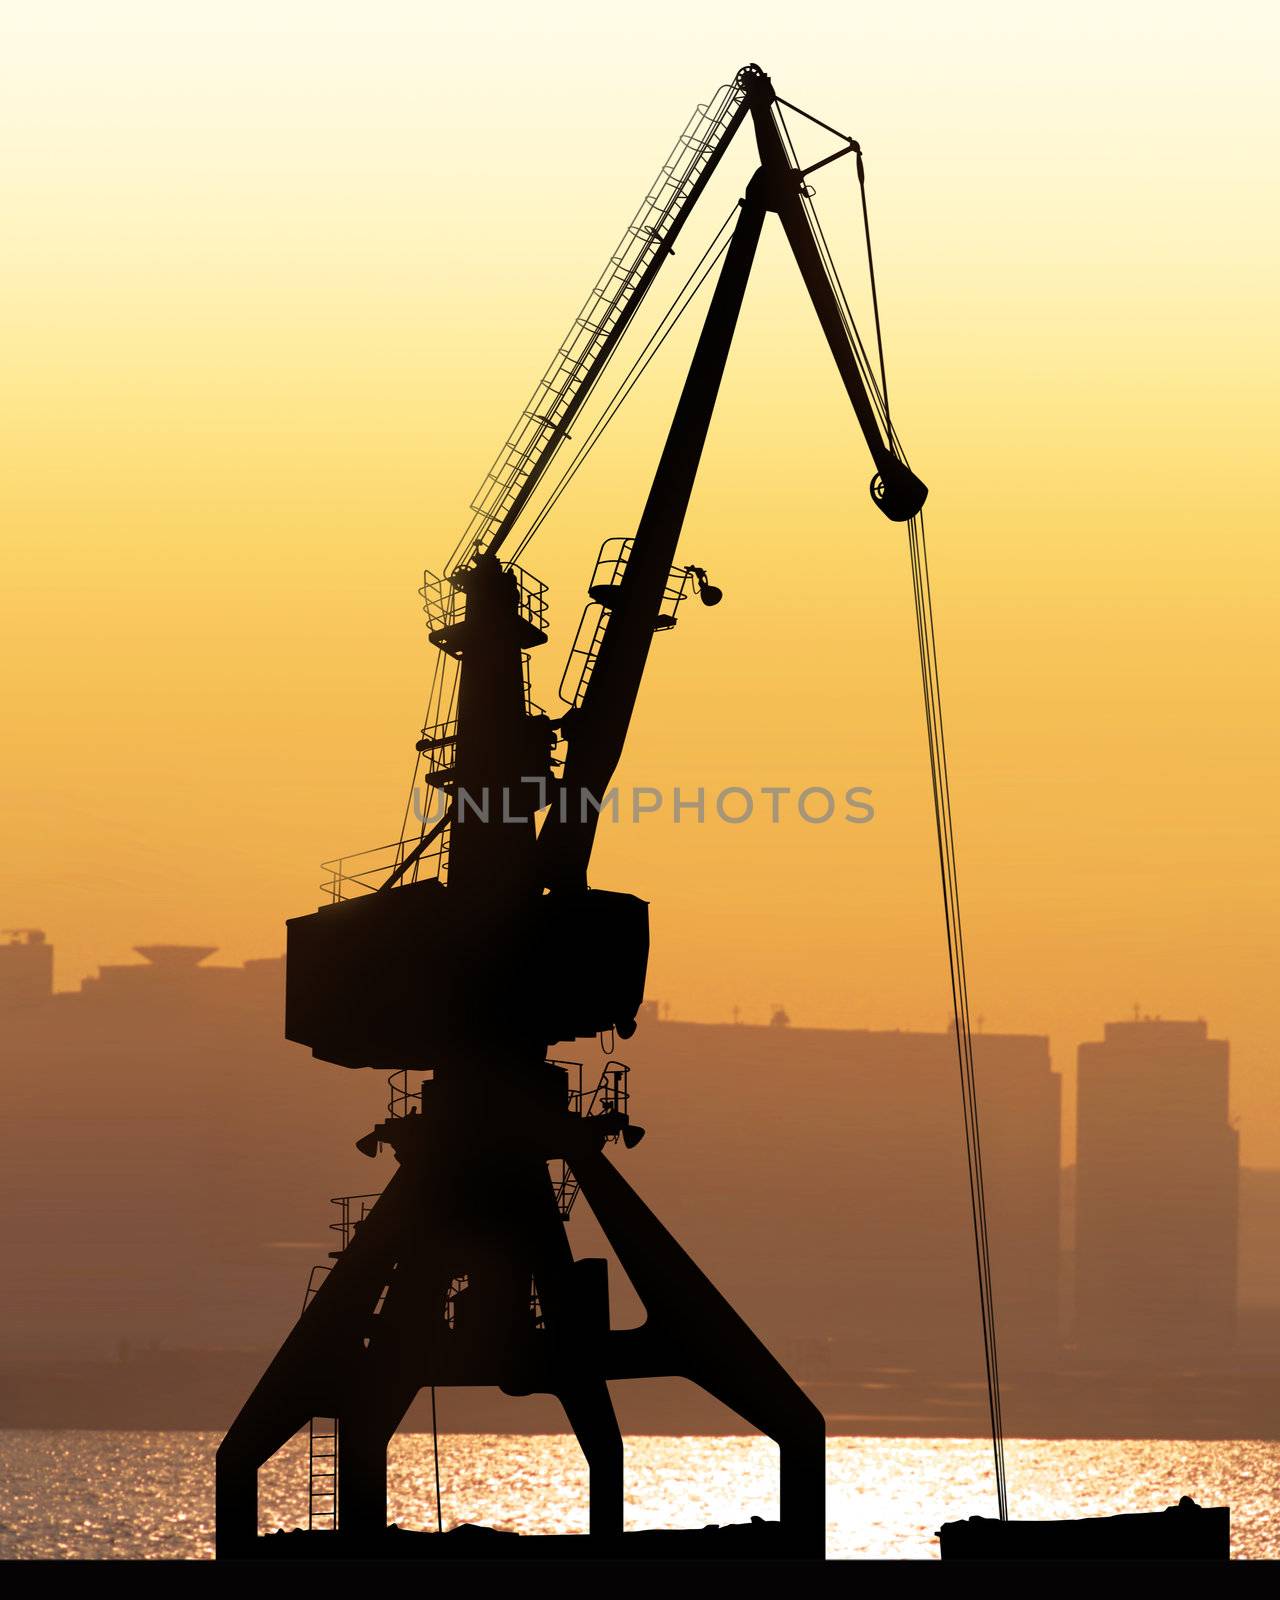 crane sit dramatically against a colorful sunset in a large shipyard